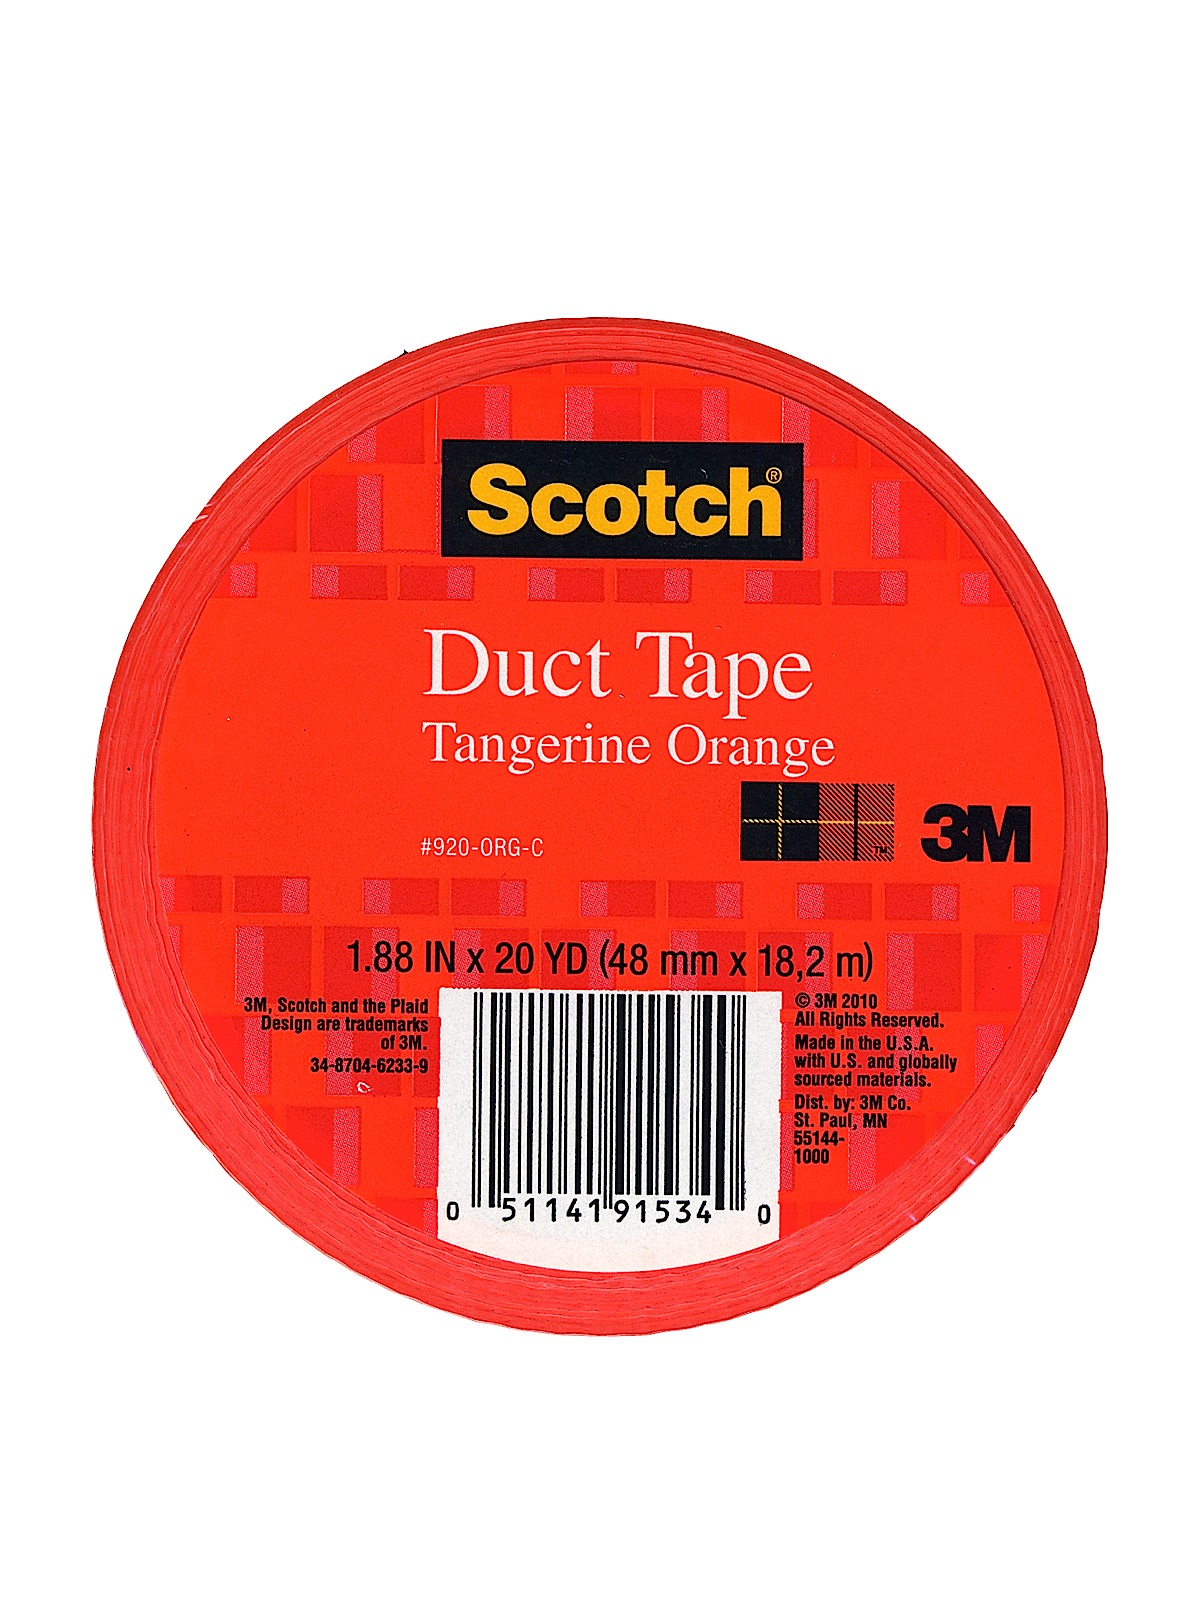 Colored Duct Tape Tangerine Orange 1.88 In. X 20 Yd. Roll 920-ORG-C